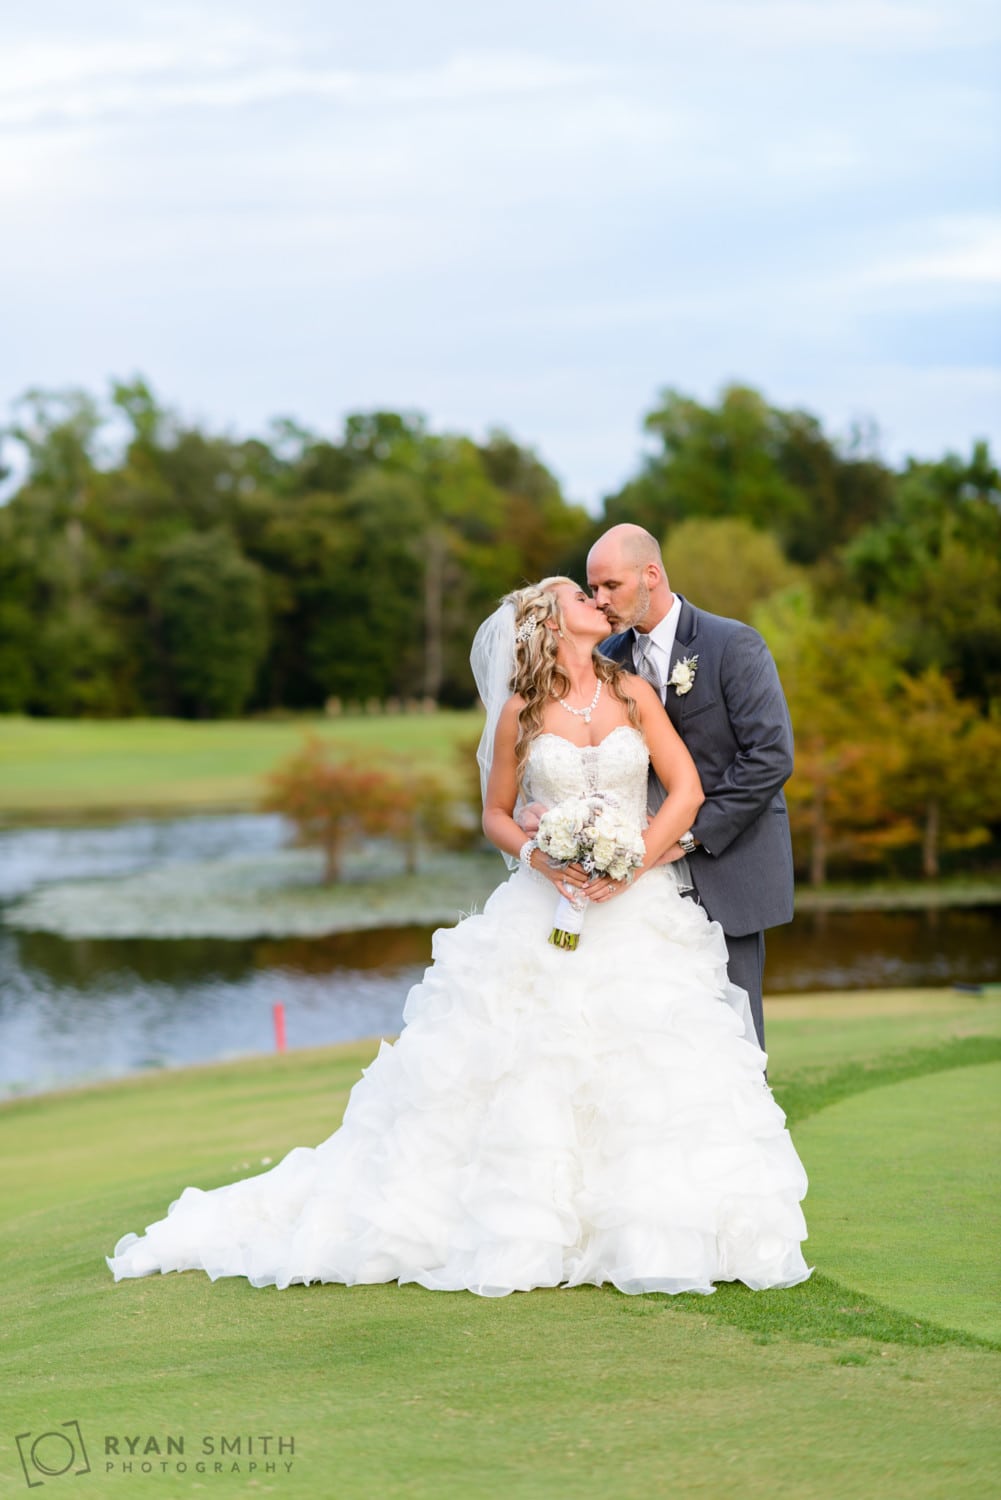 Kiss on the golf course - Members Club at Grande Dunes